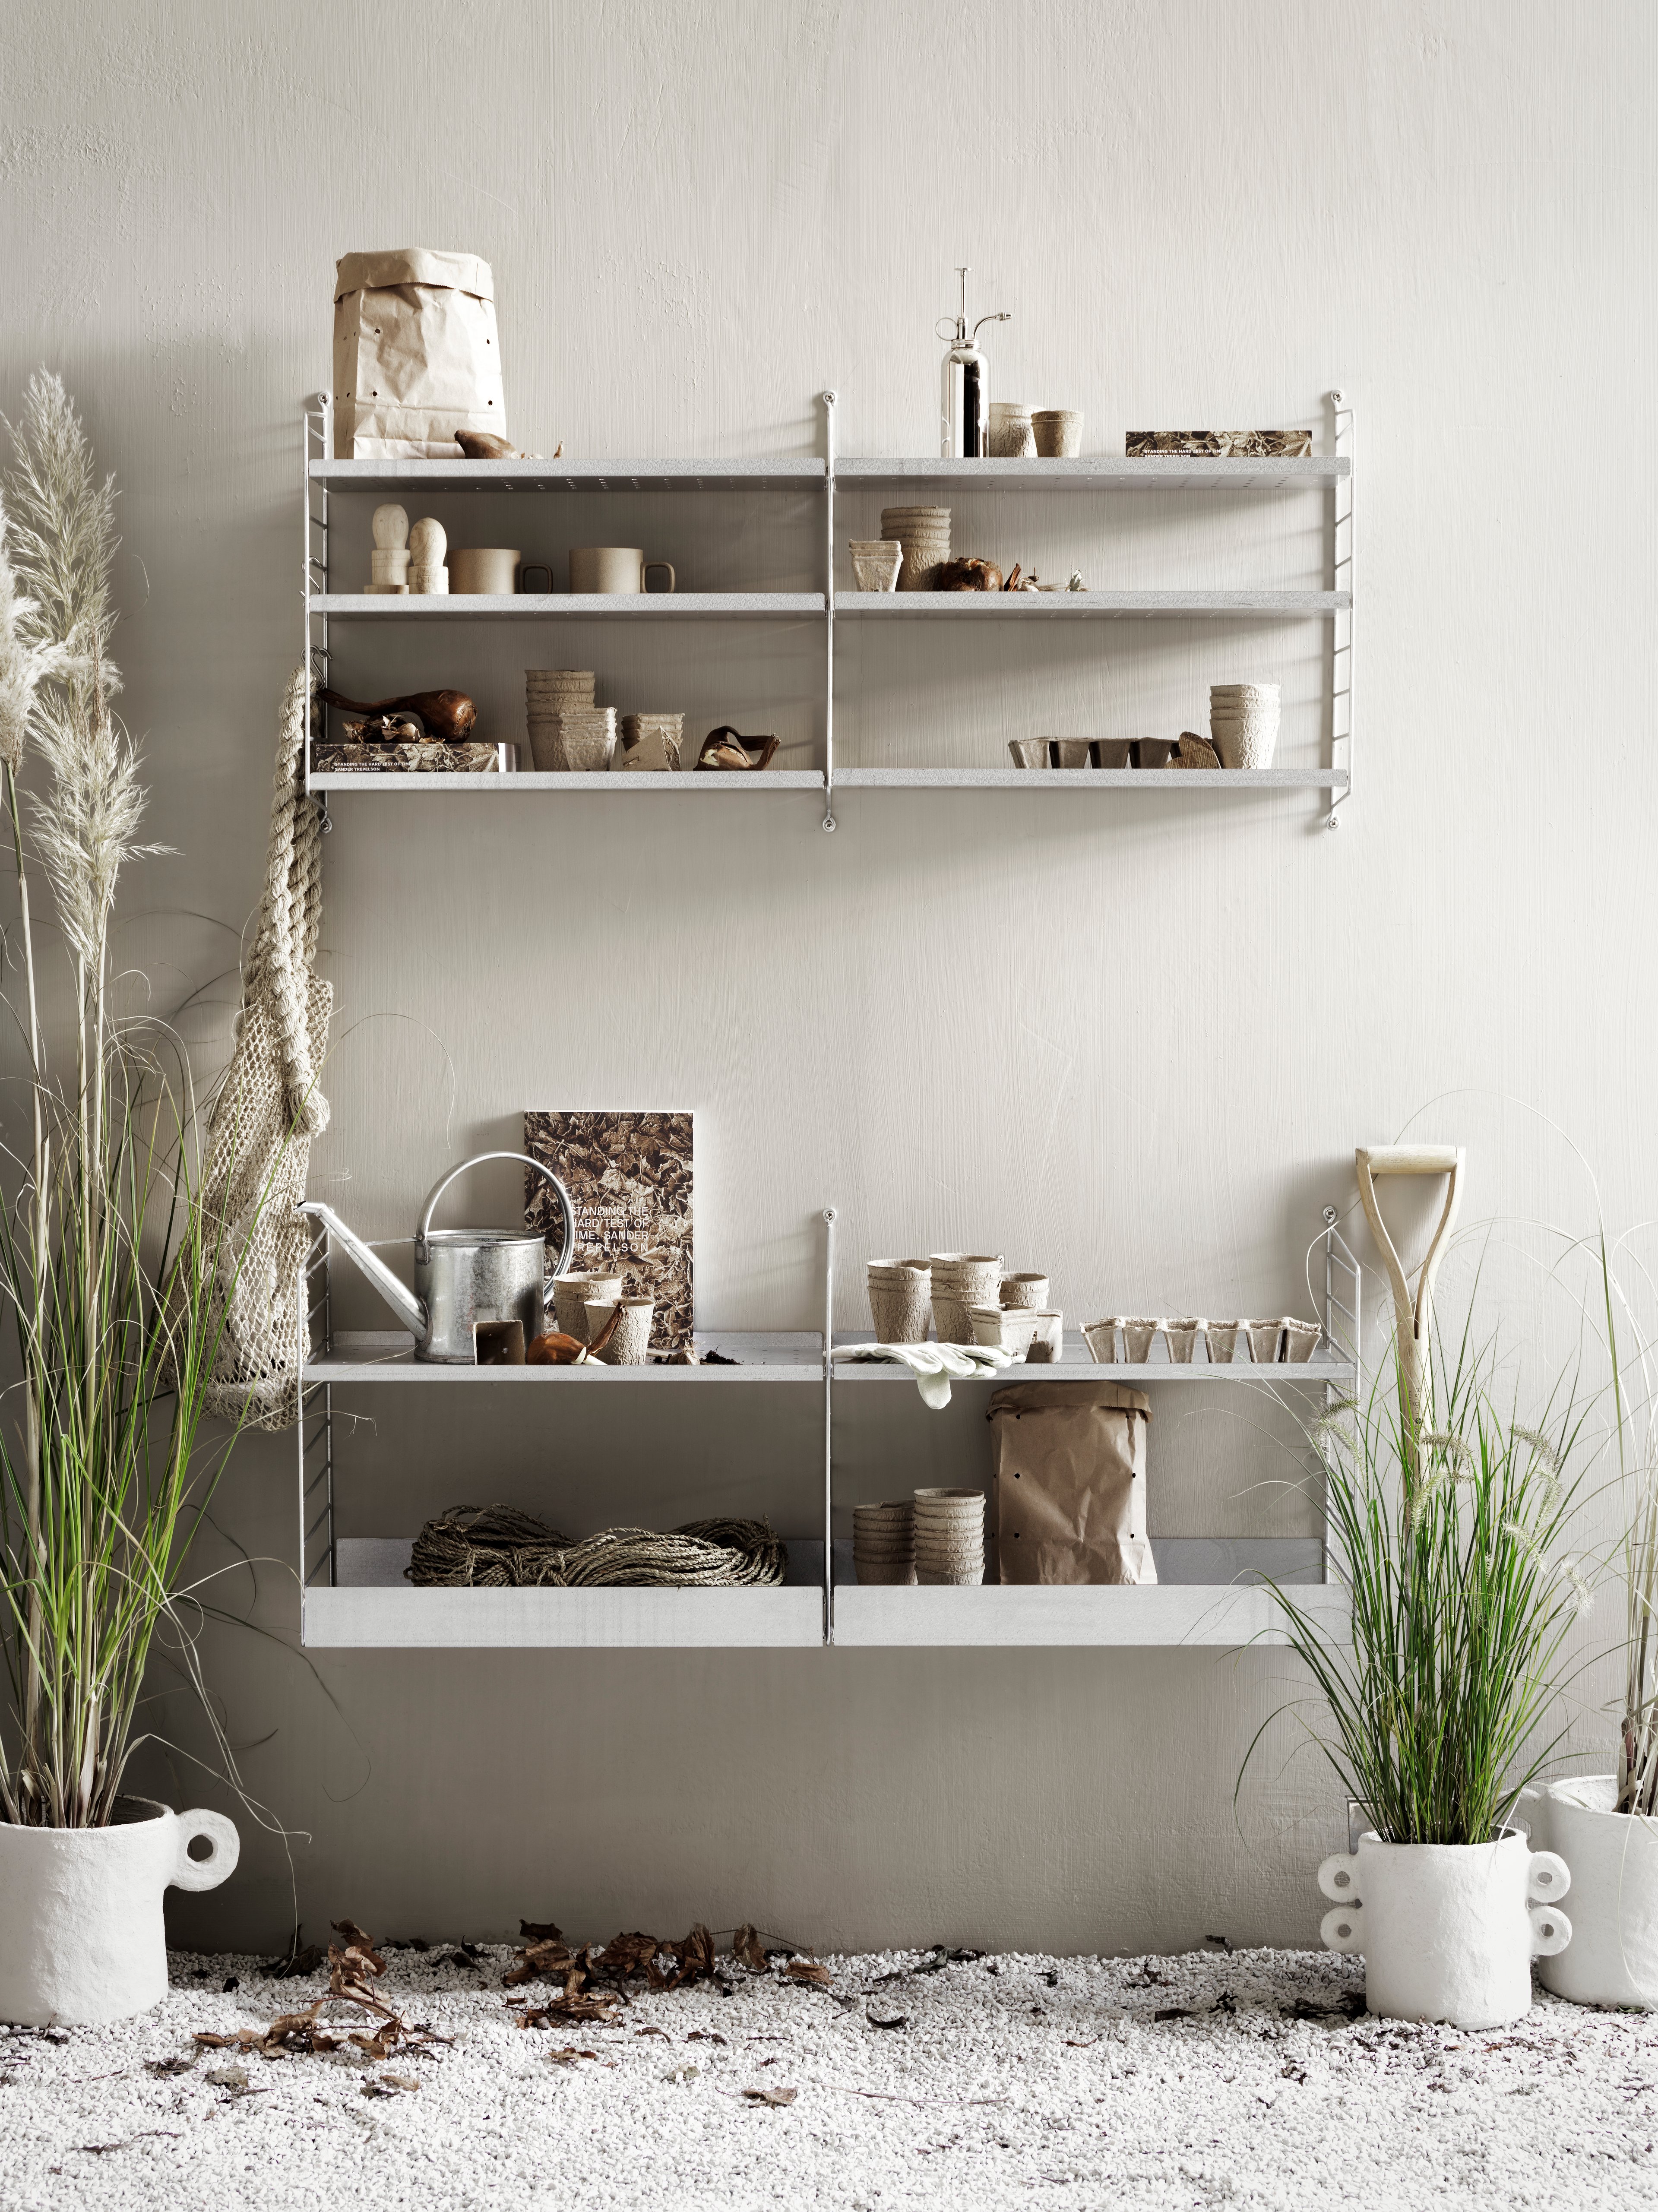 Floor mounted outdoor solution from String. Galvanized wall panels, shelves high and low.